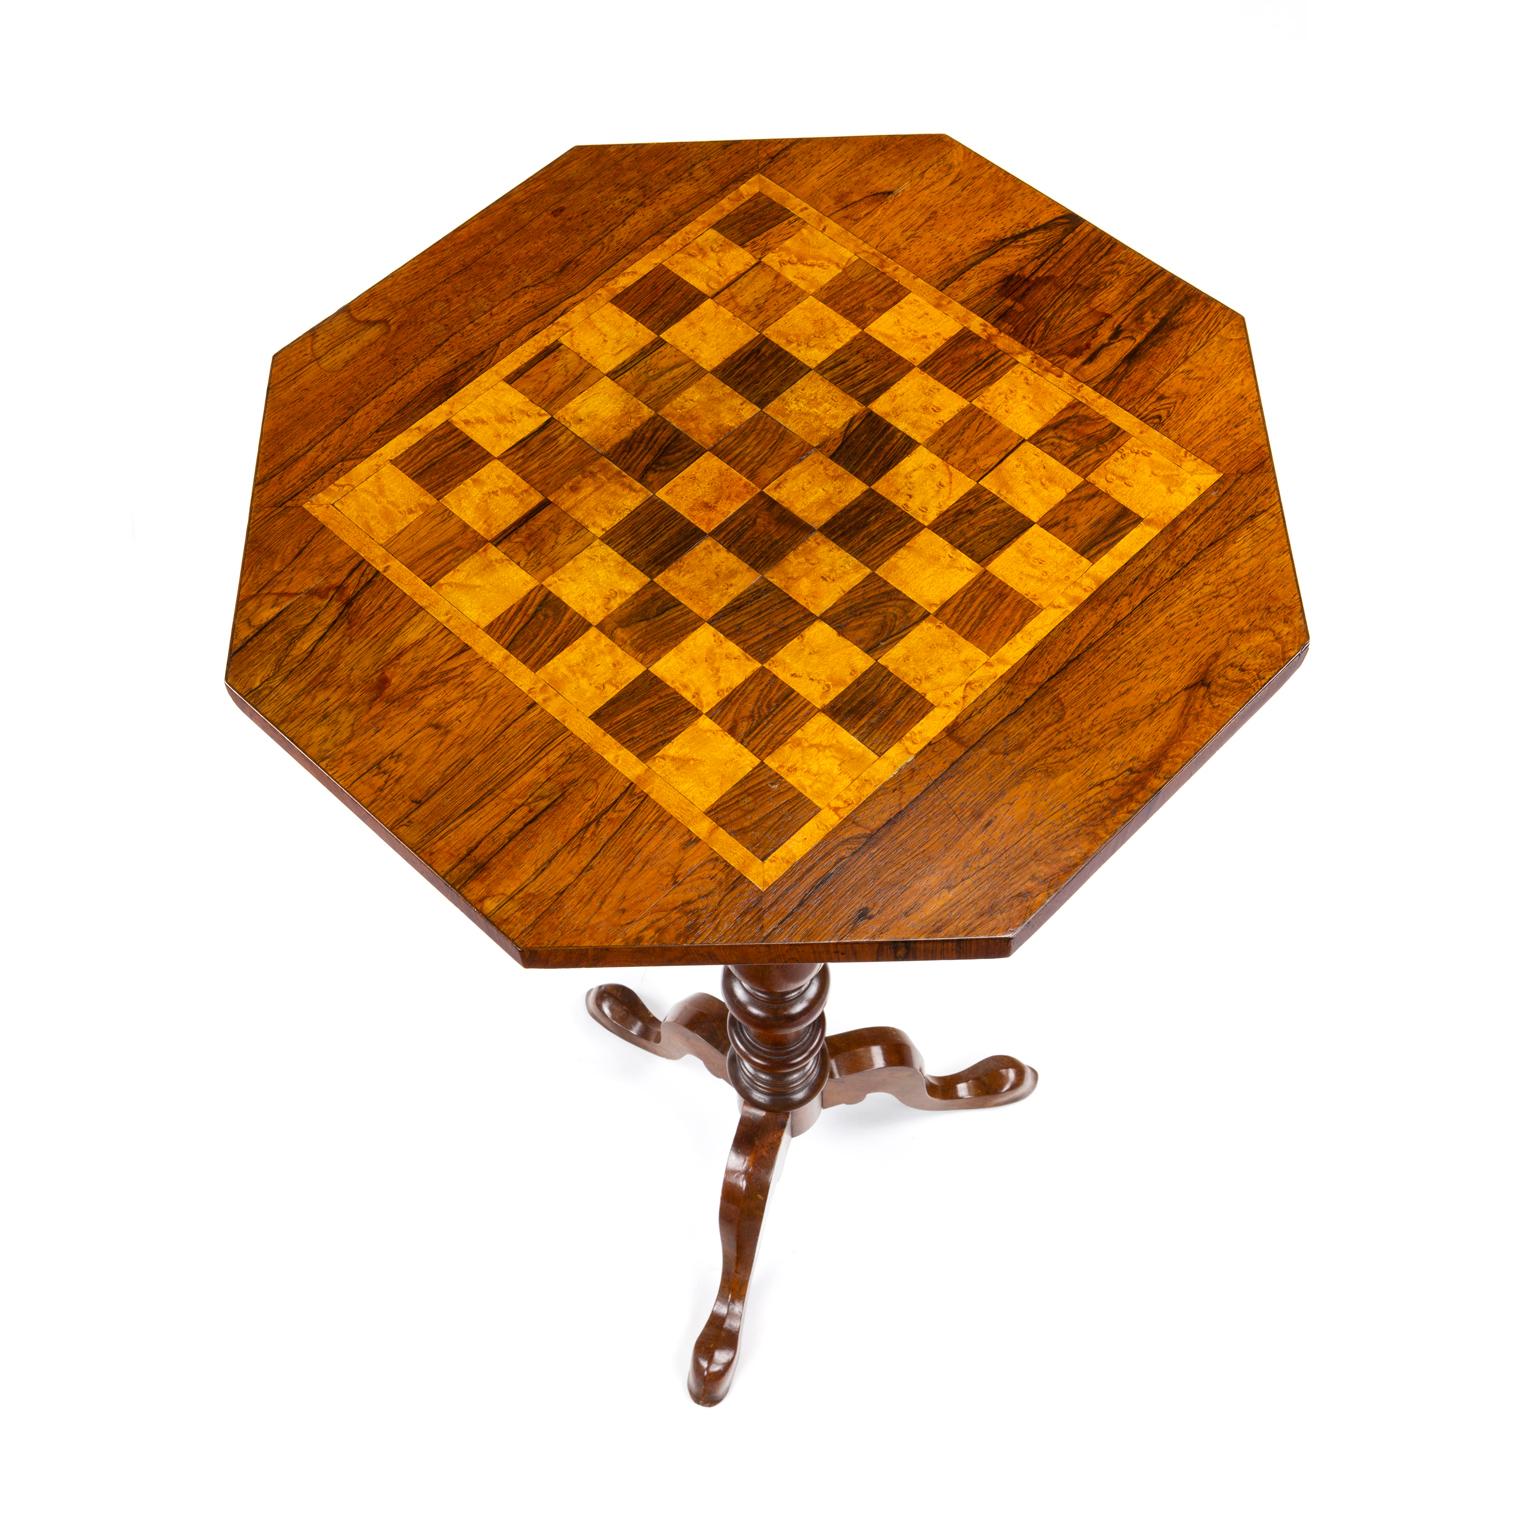 19th Century Regency Rosewood Chess Table Accedited to Gillows of Lancaster and London